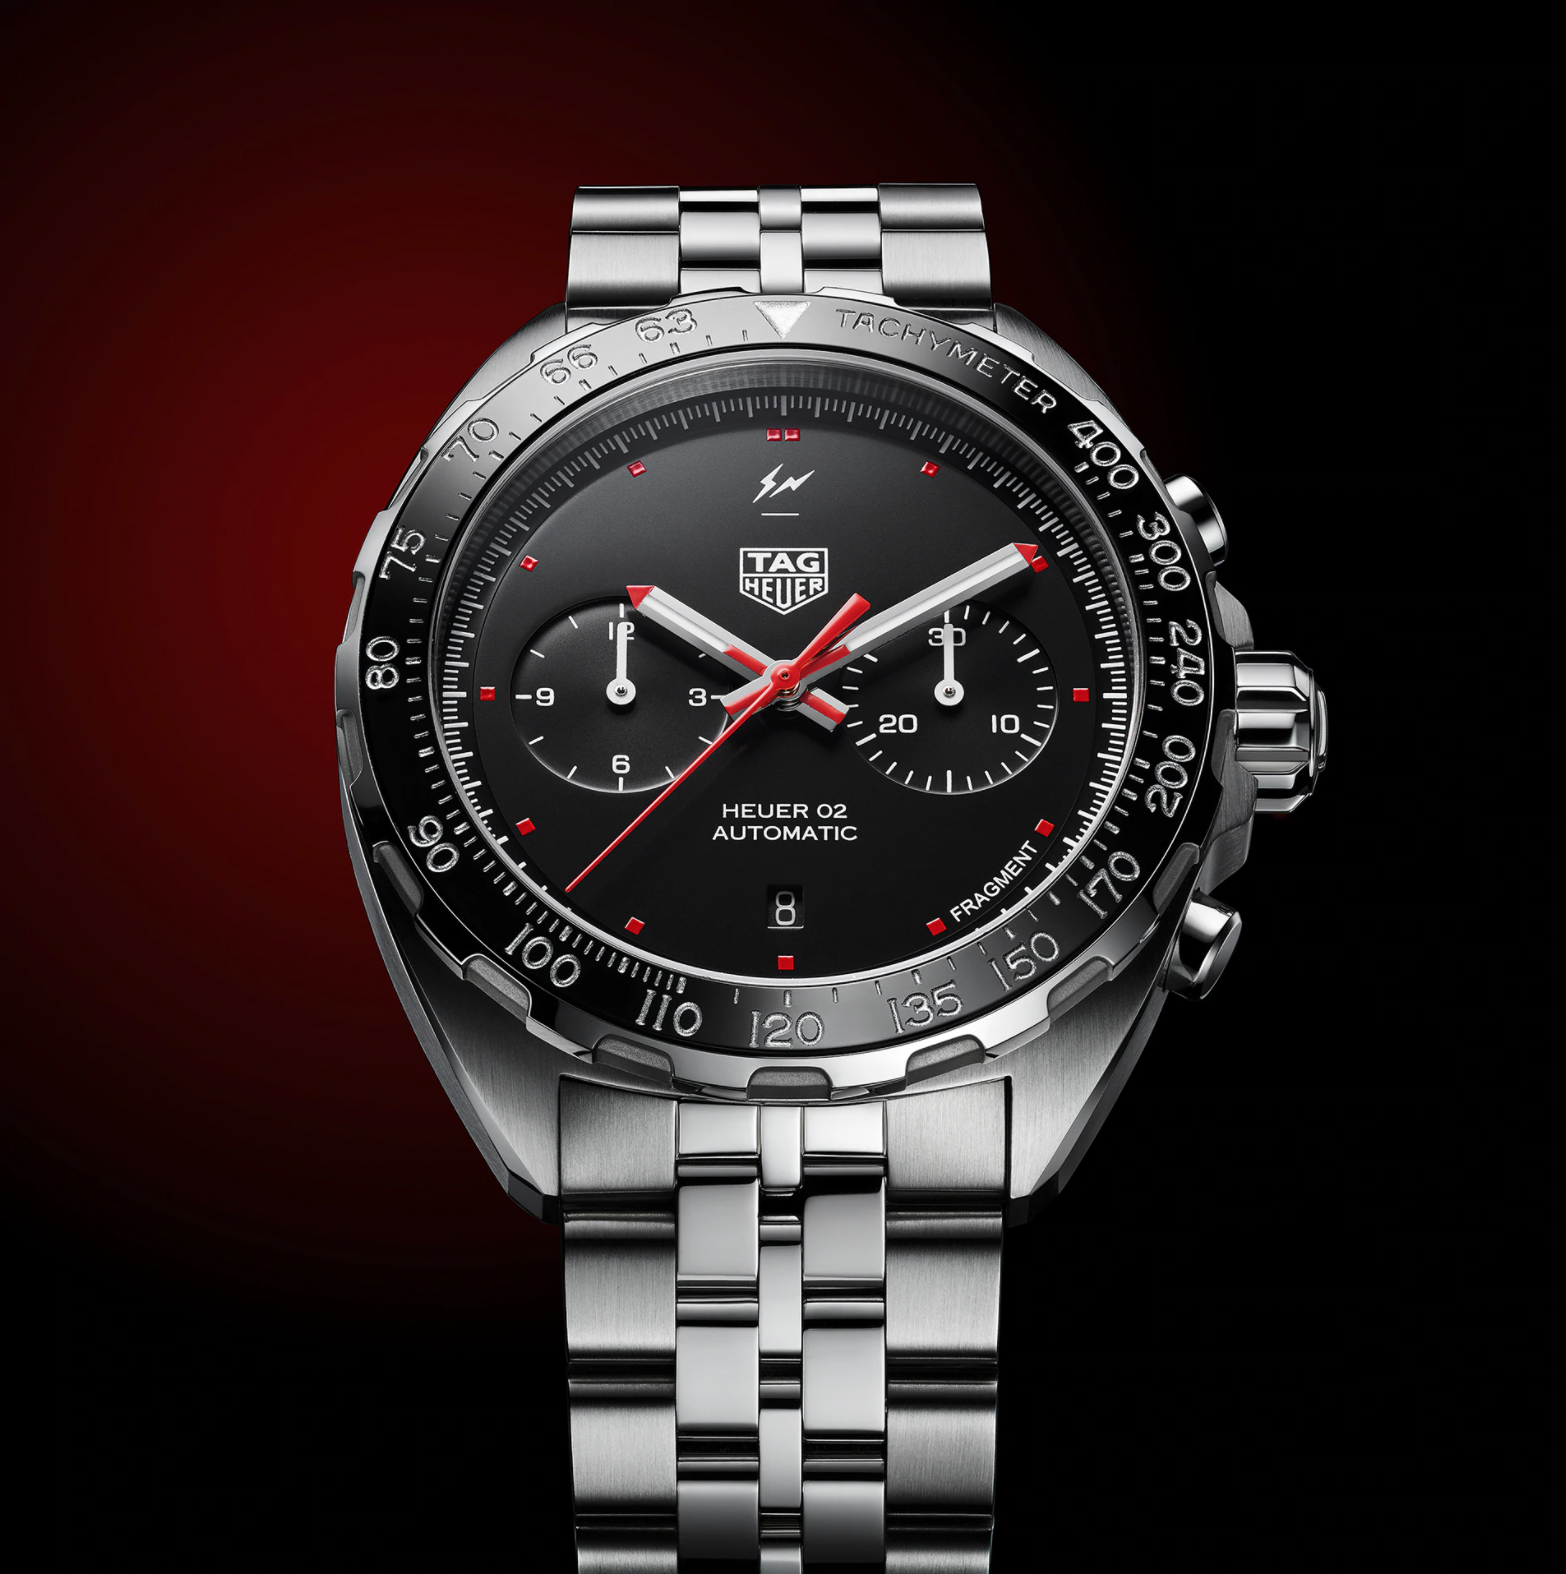 INTRODUCING: The masterclass in macho minimalism that is the TAG Heuer x Fragment Design Chronograph